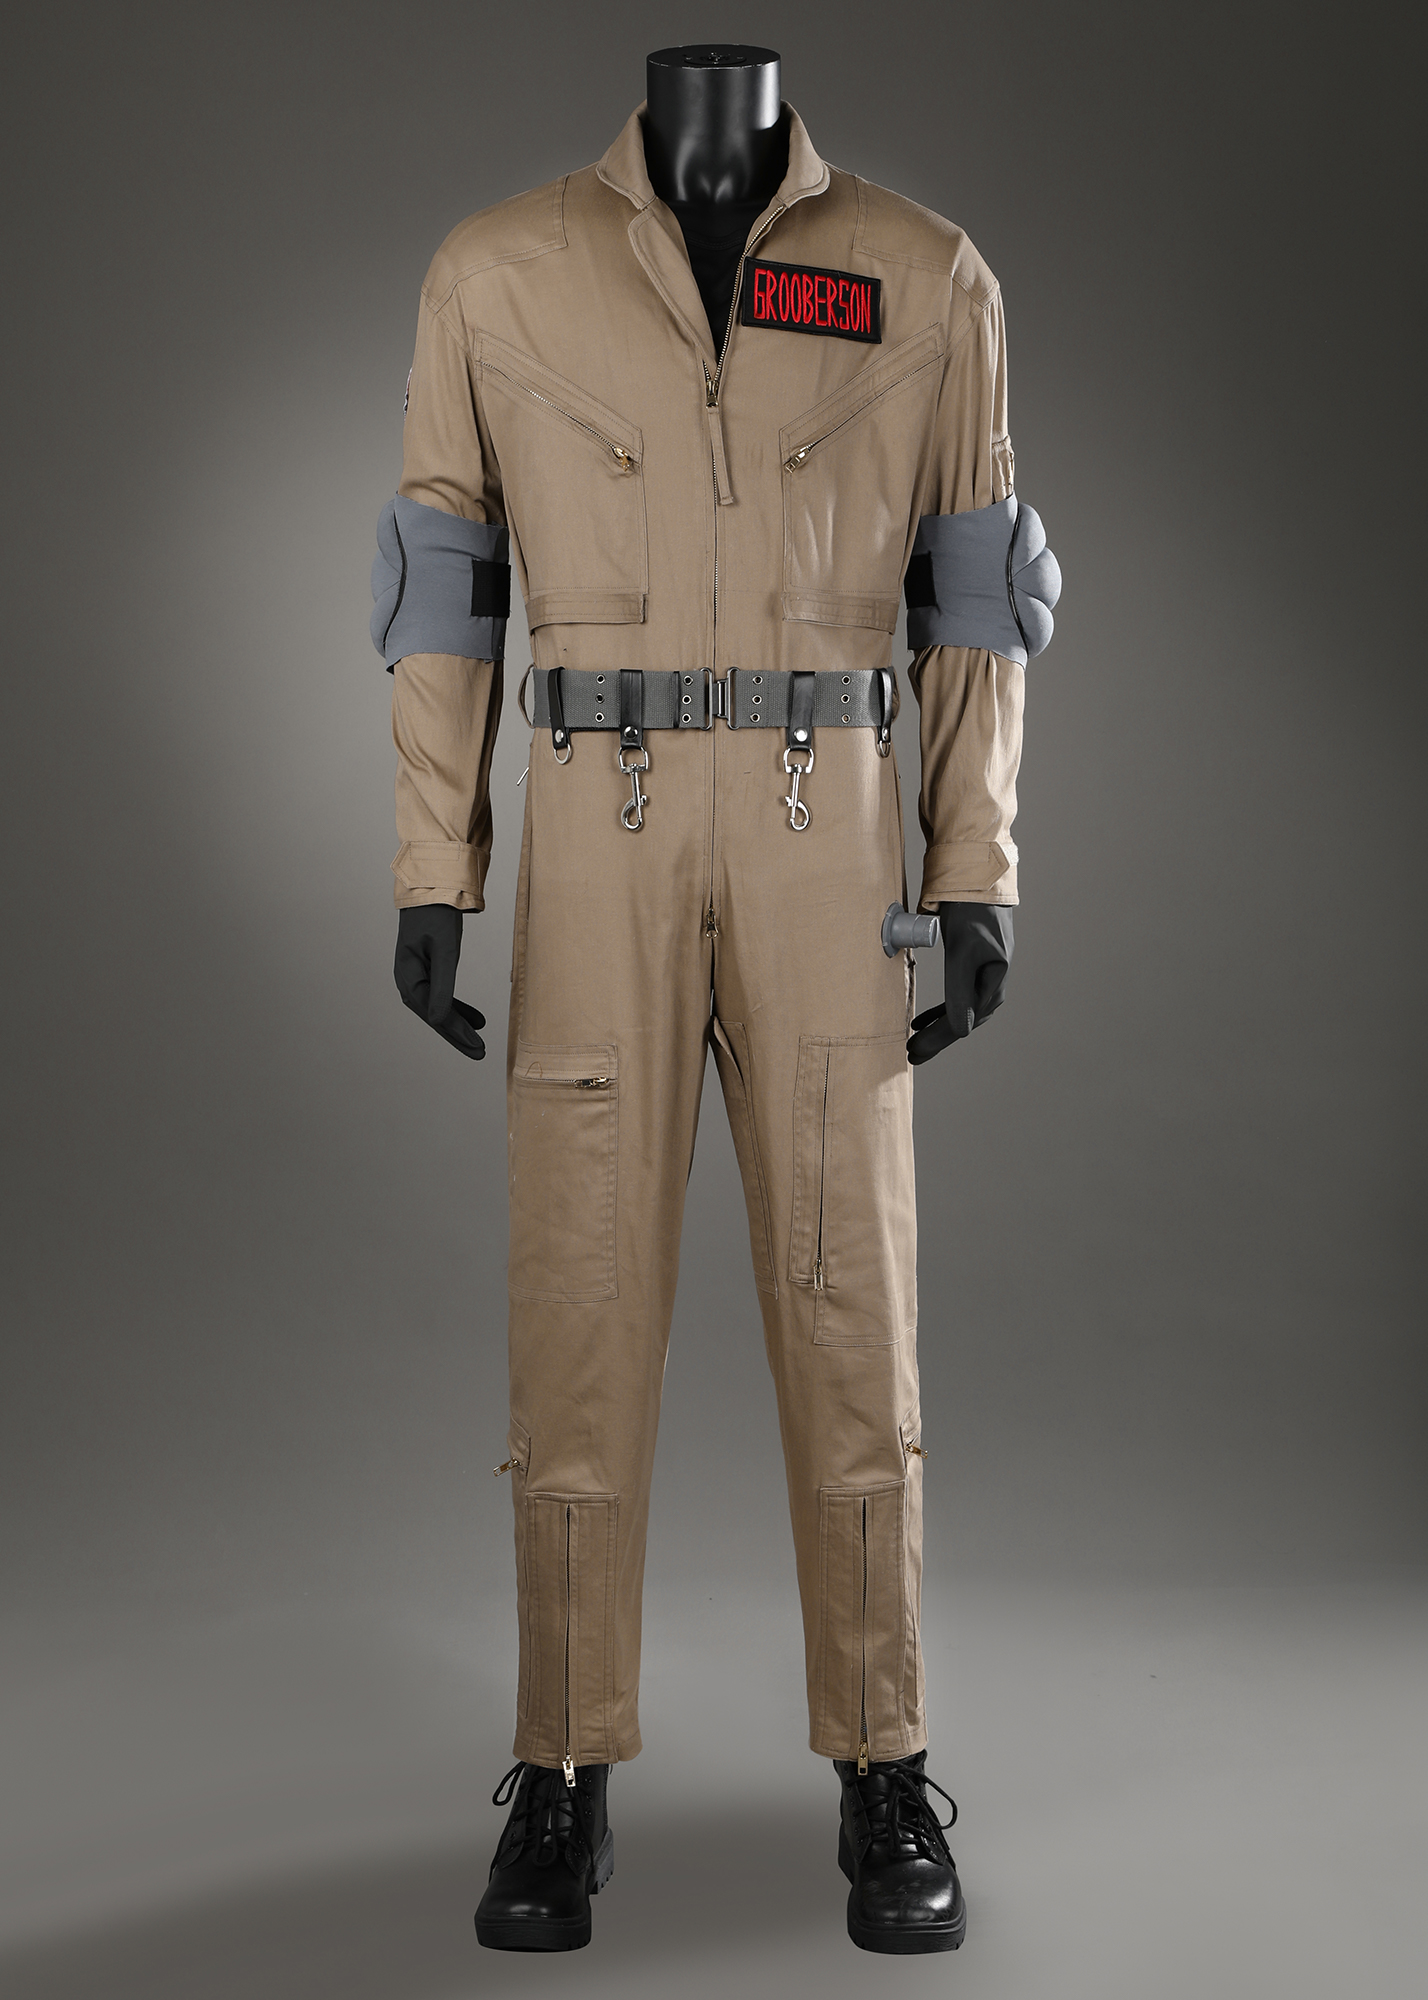 Gary Grooberson Costume Ghostbusters: Frozen Empire Suit Cosplay